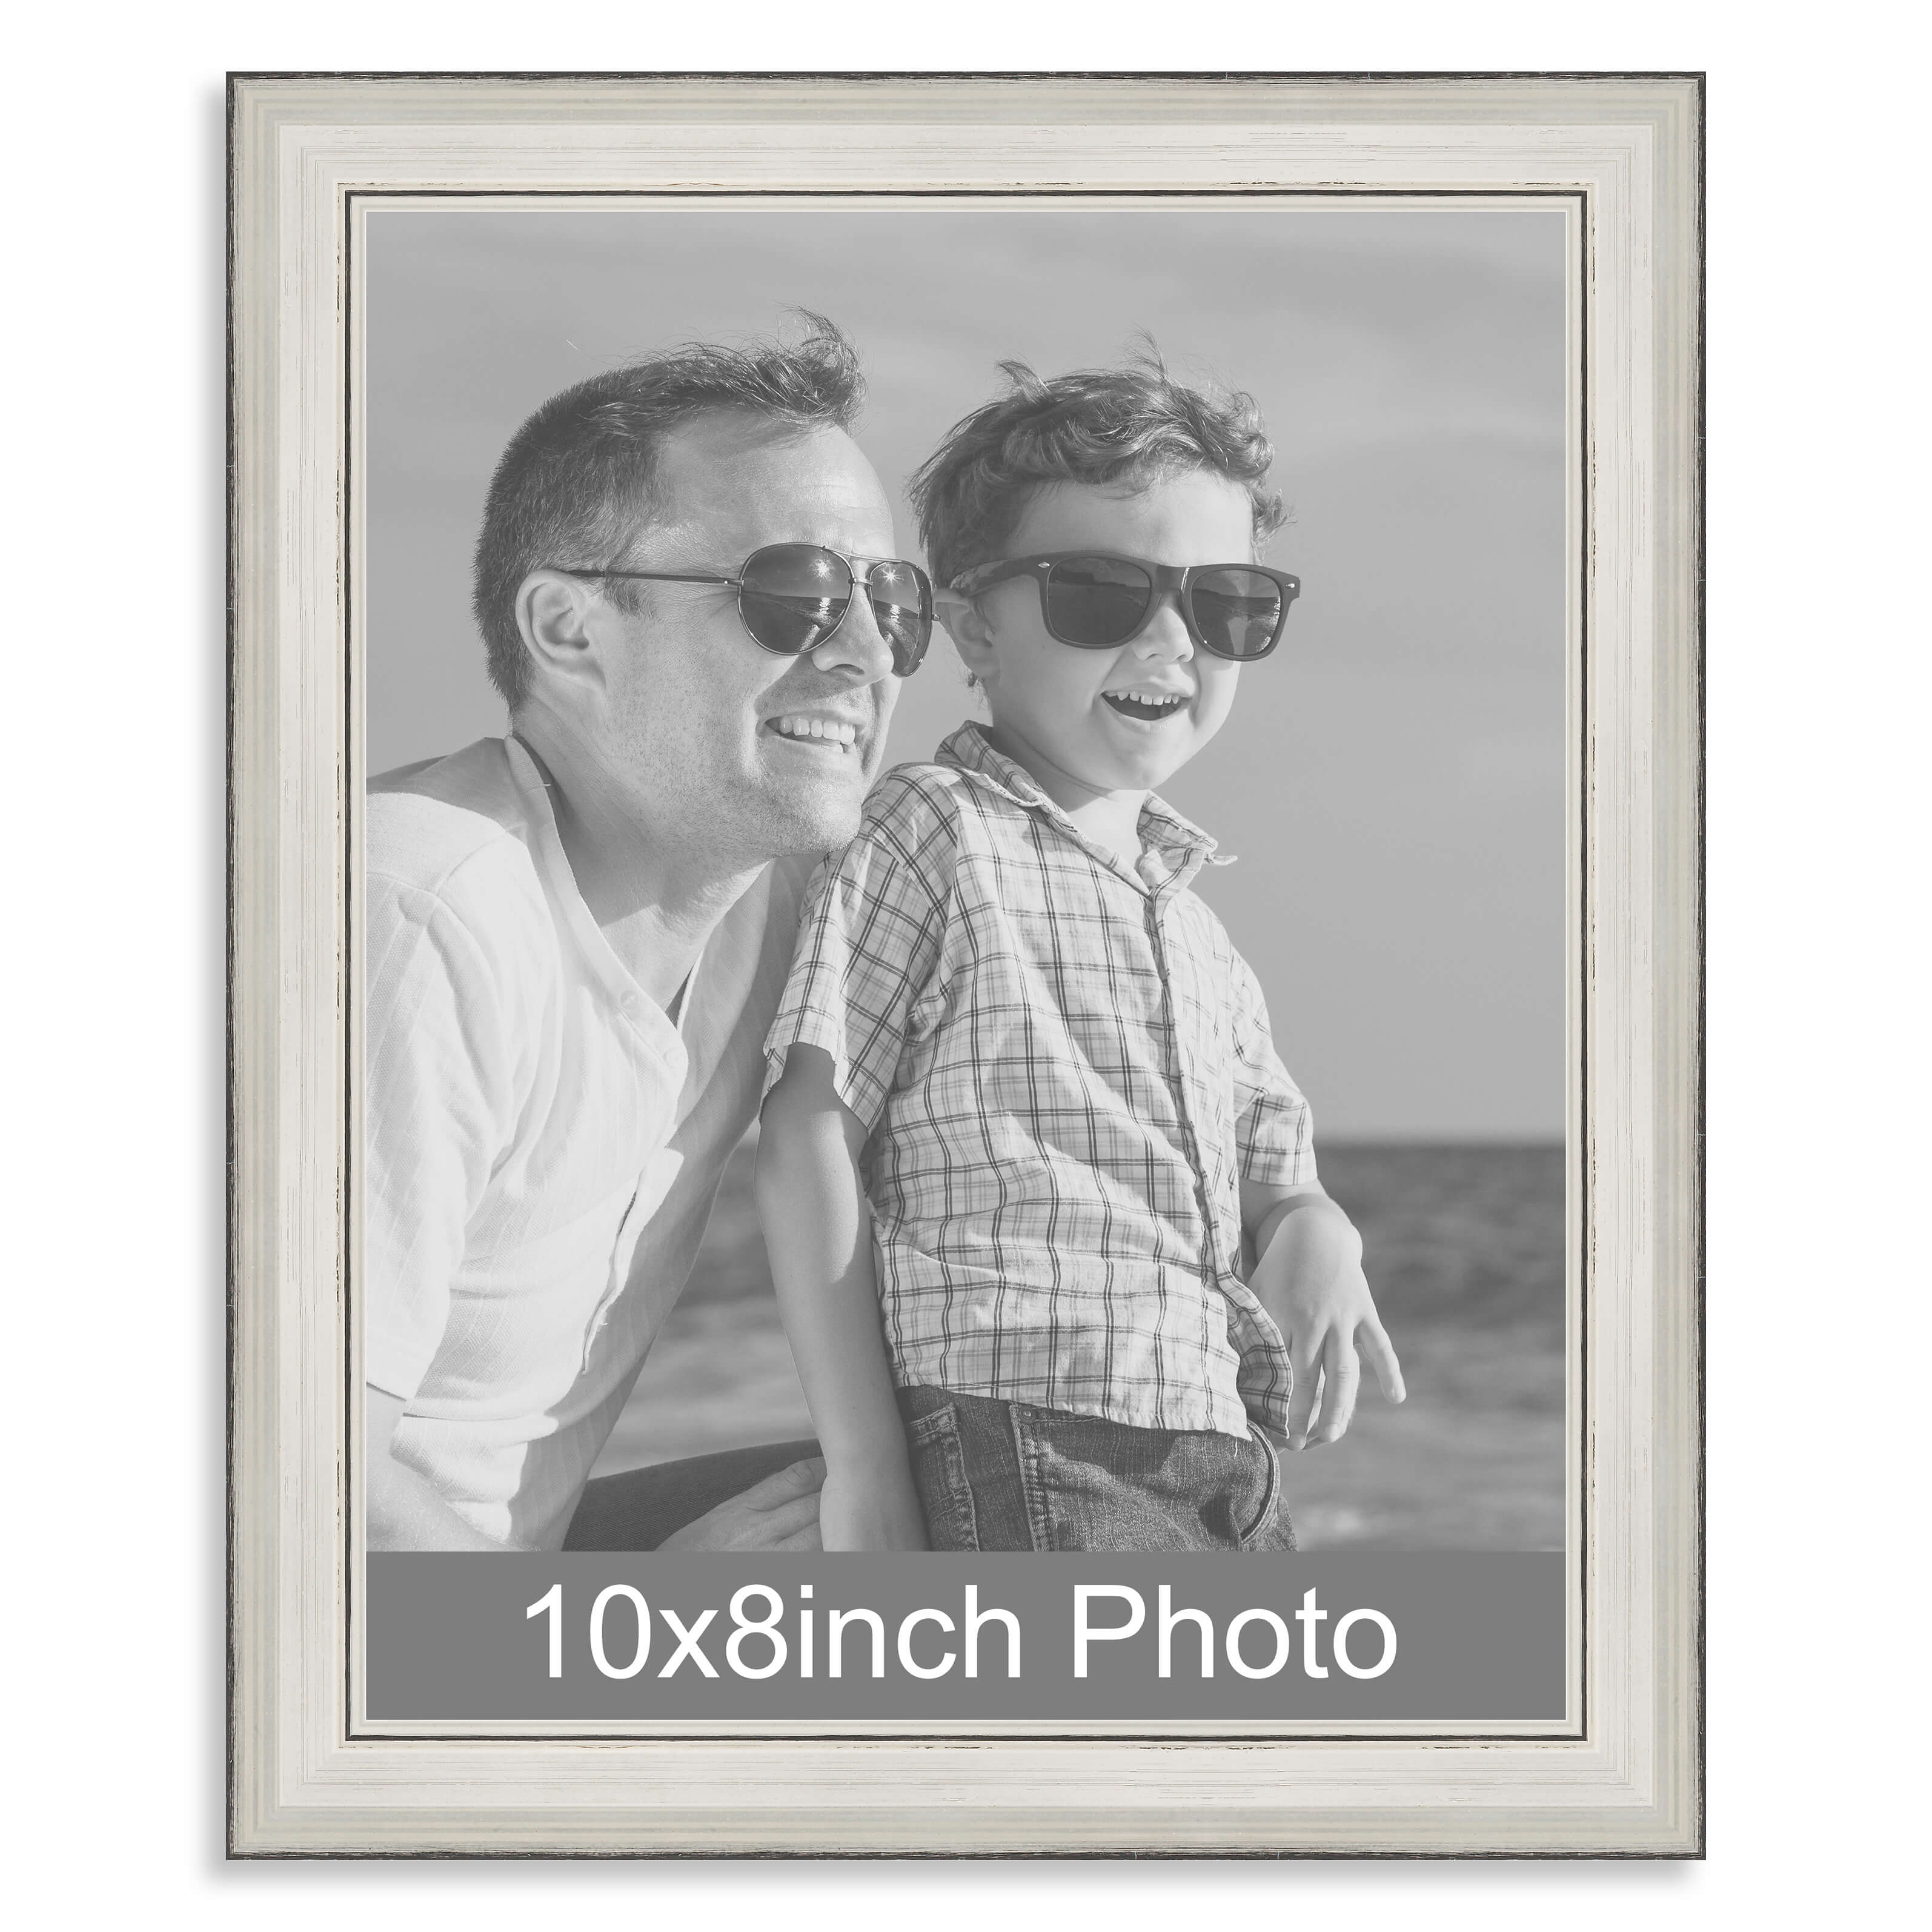 10 x 8inch Silver Wooden Photo Frame for a 10×8/8x10in image – Photo Not Required